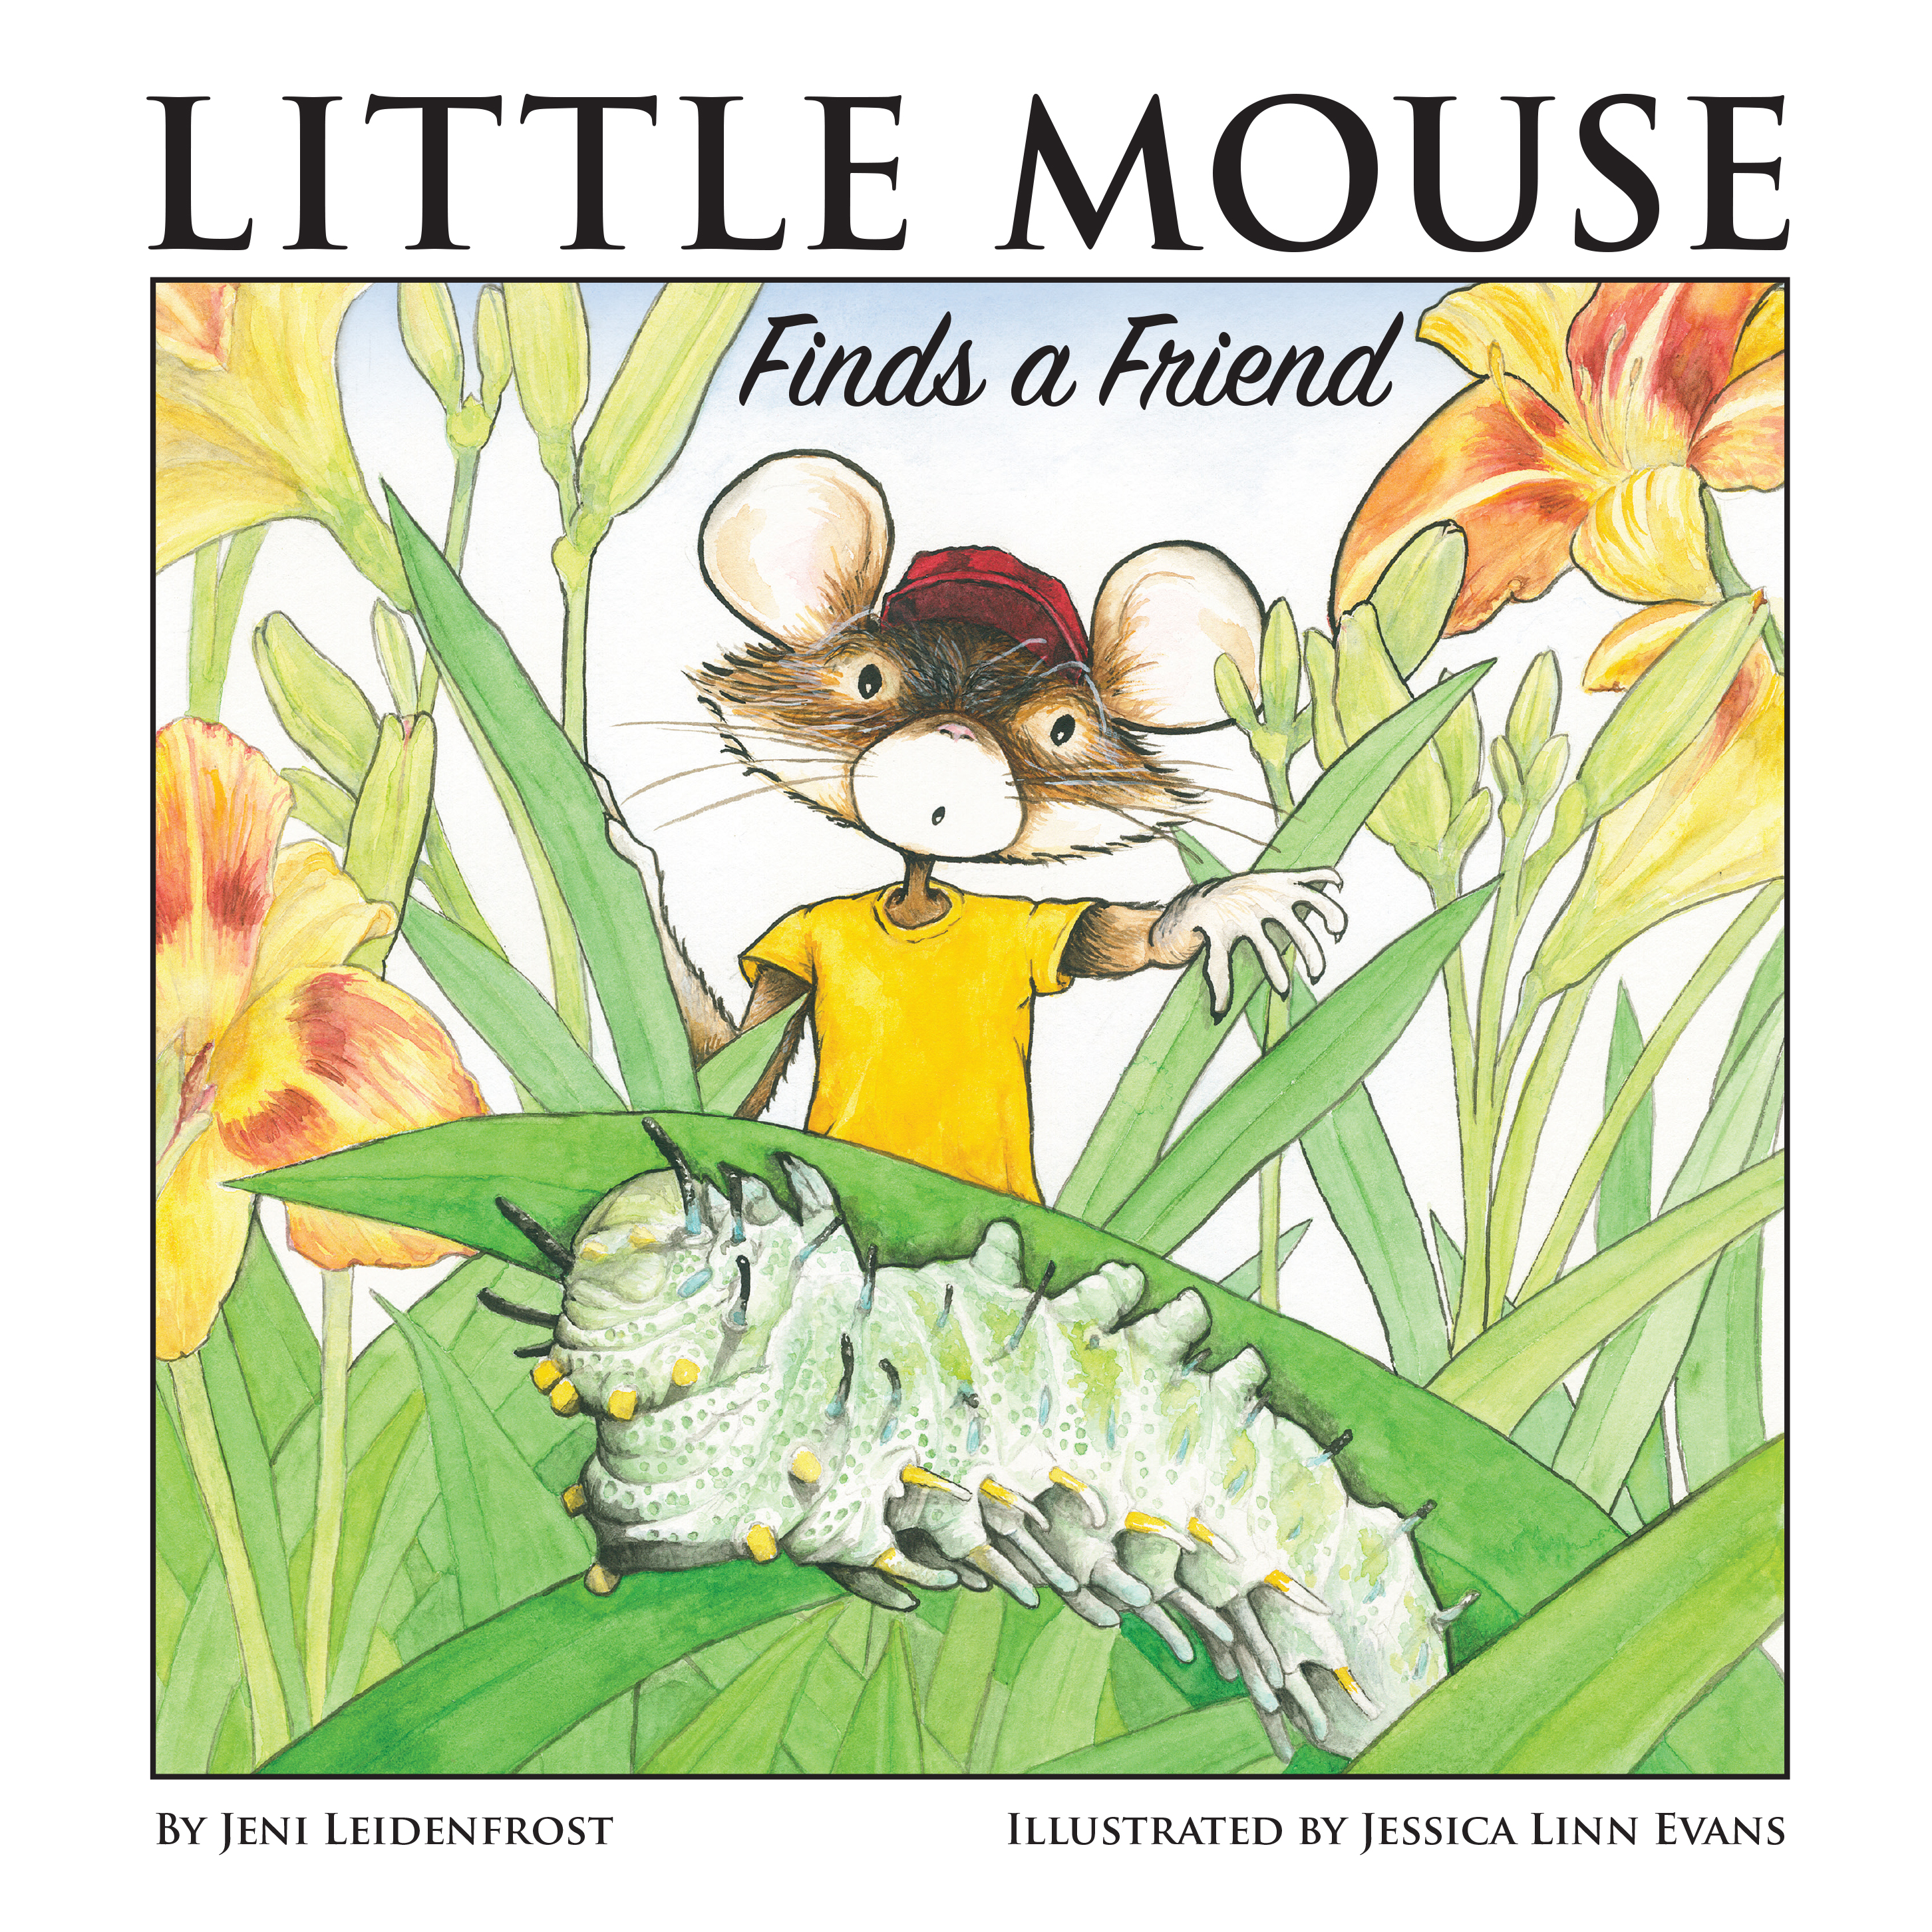 Little Mouse Finds a Friend by Jeni Leidenfrost and Jessica Linn Evans